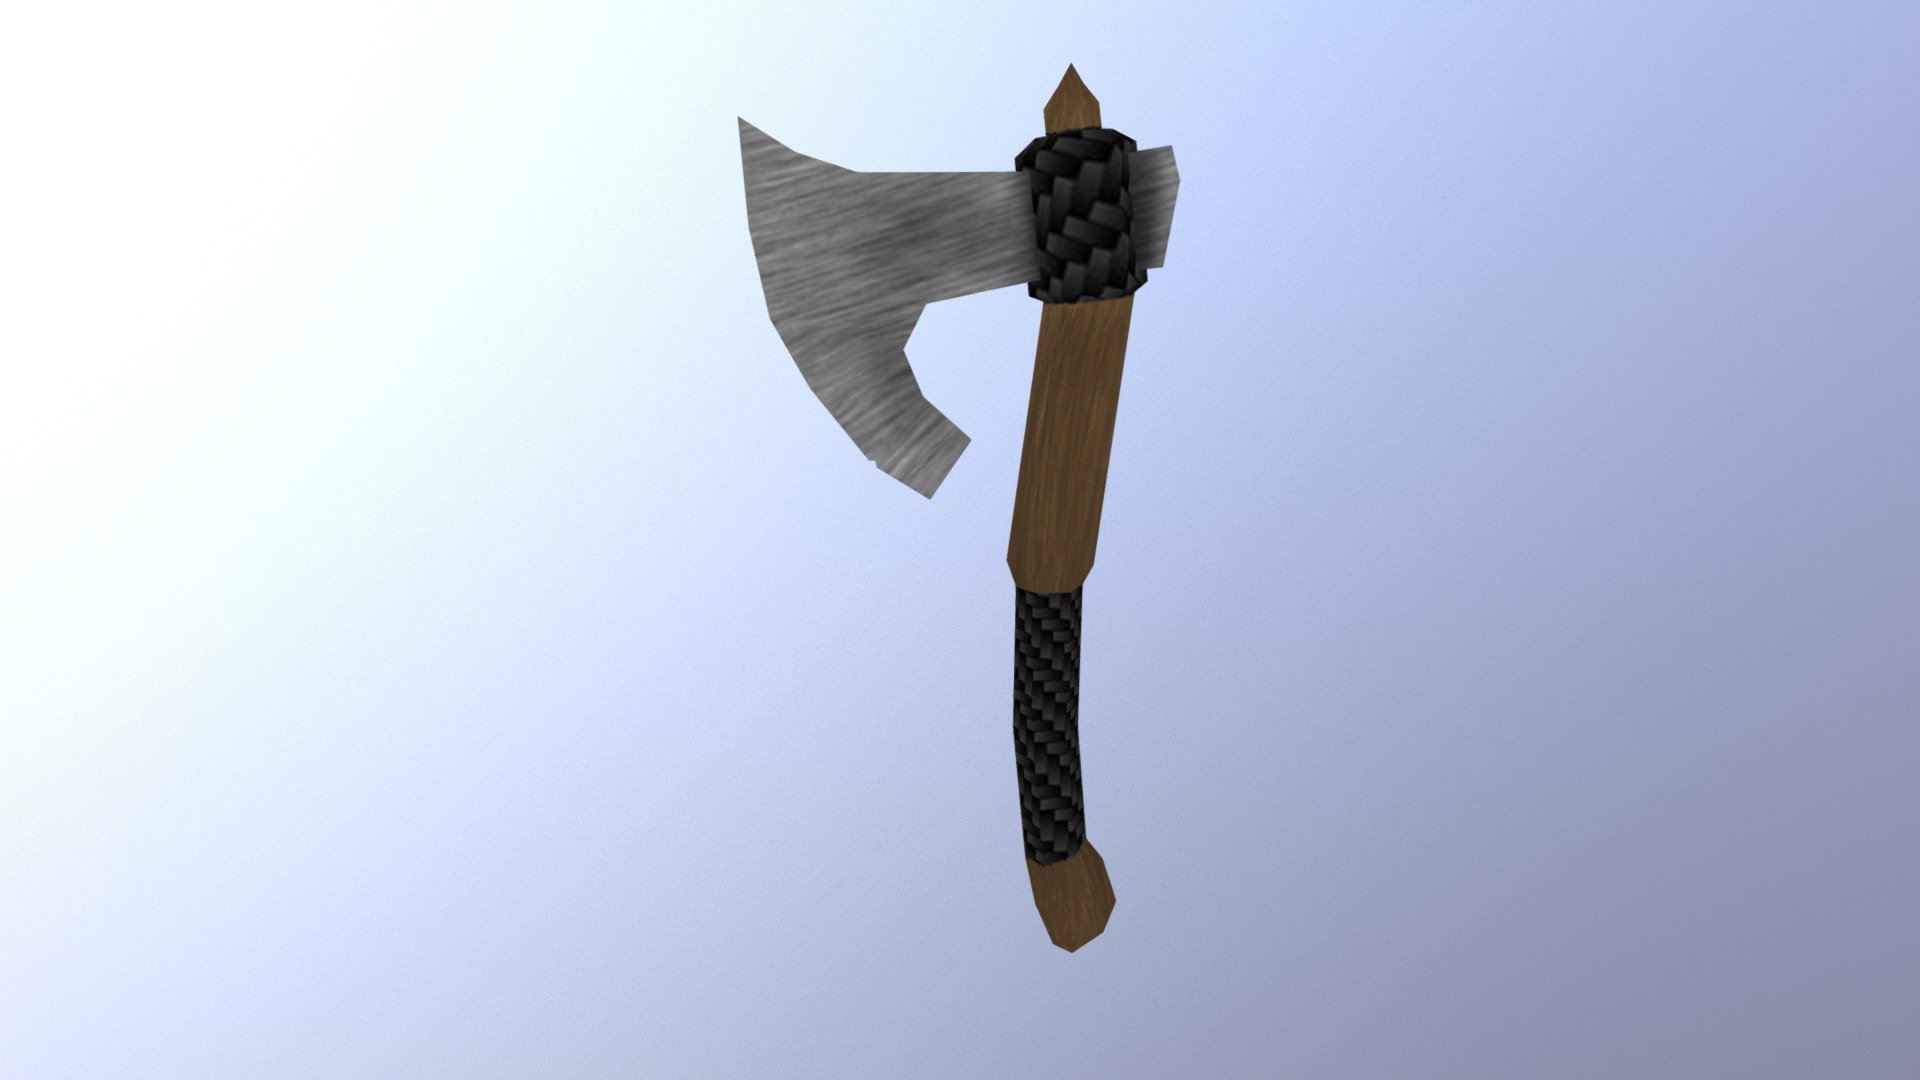 CGCOOKIES - Texture Painting an Ax